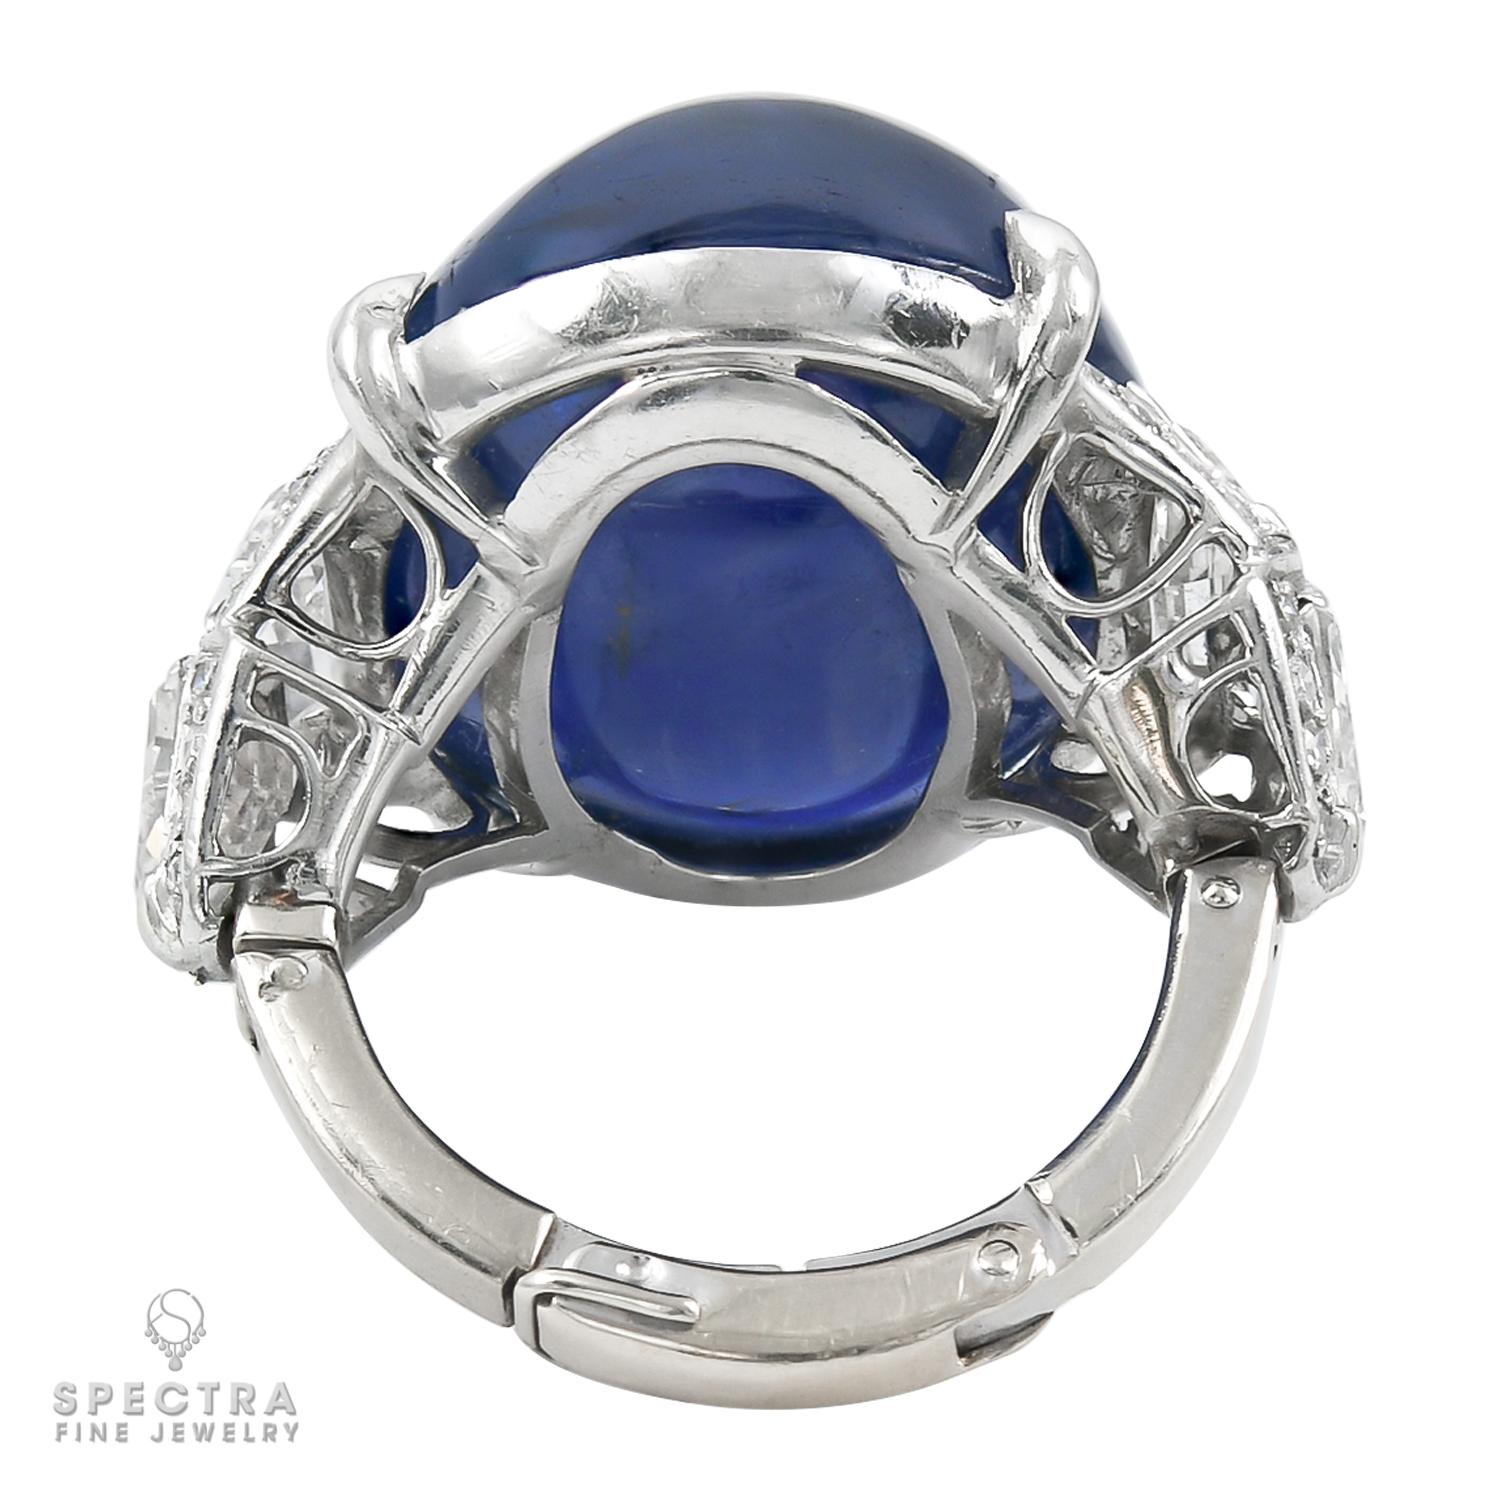 Certified 40.59 Carat Burma Sapphire Diamond Cocktail Ring In New Condition For Sale In New York, NY